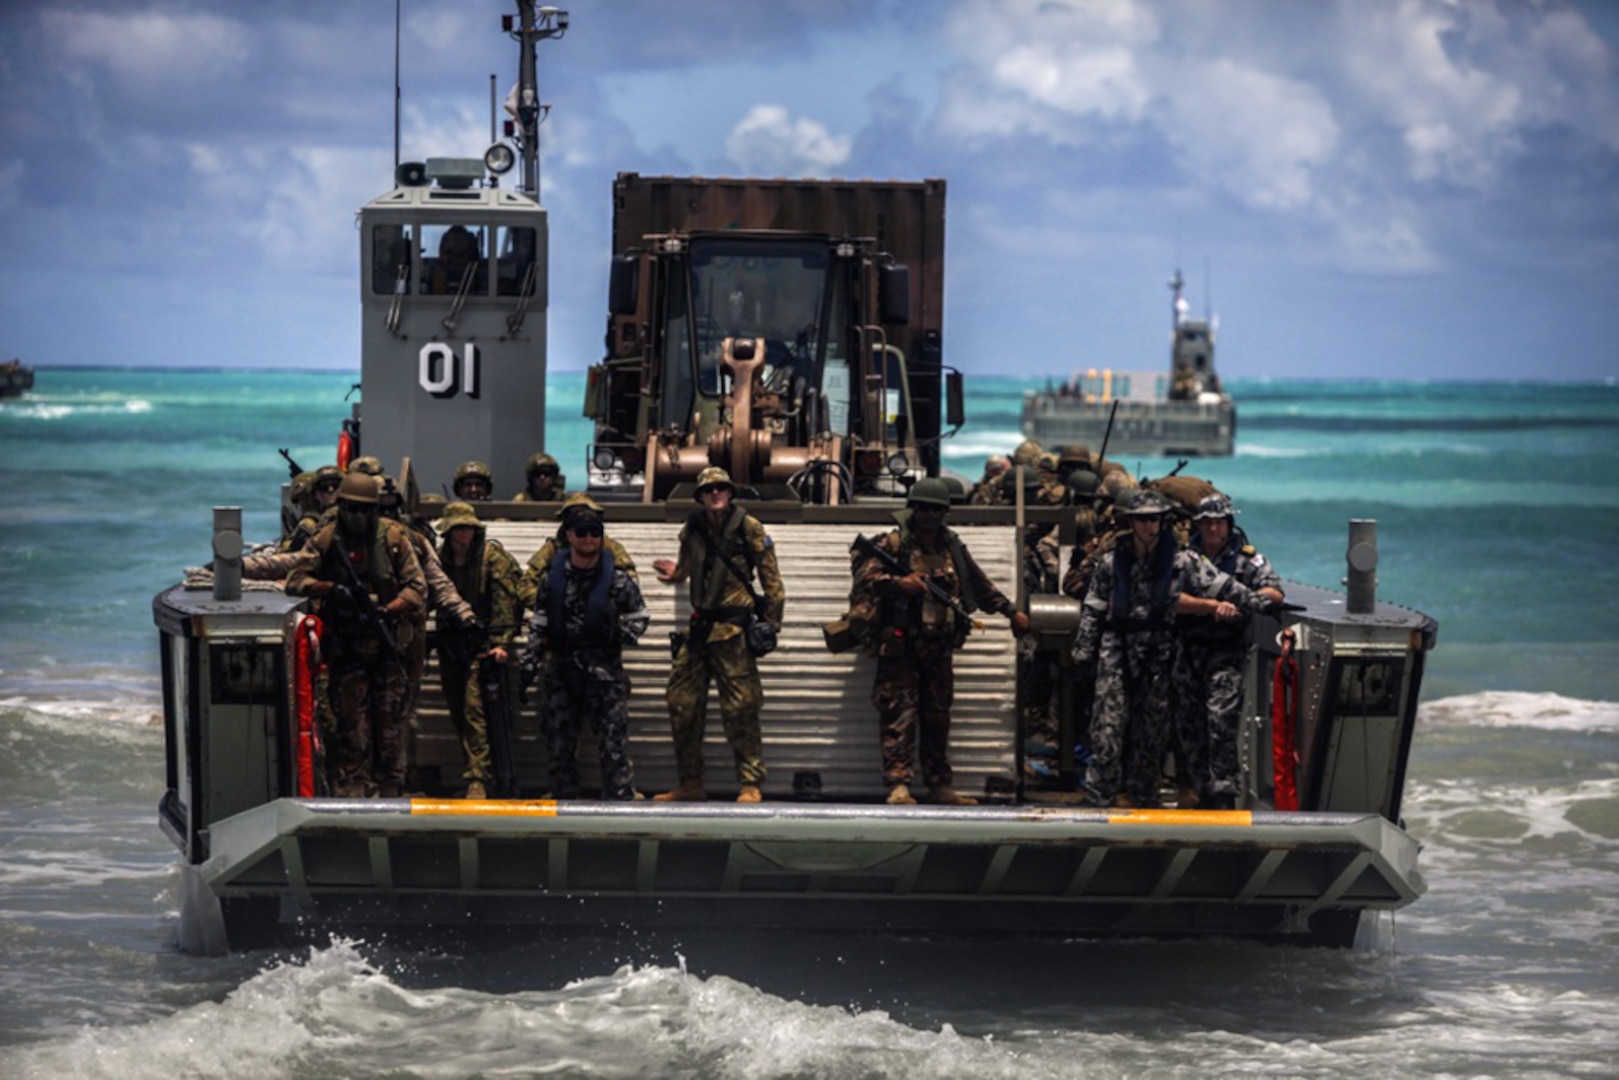 A Royal Australian Navy LHD Landing Craft, transports Australian, New Zealand, Tongan, and U.S. armed forces to Marine Corps Training Area Bellows during Rim of the Pacific 2016 in Hawaii.  The crafts landed troops from 2nd Battalion, Royal Australian Regiment, Provisional Marine Expeditionary Brigade-Hawaii, which came from HMAS Canberra to the beach during a coordinated amphibious assault with forces from Battalion Landing Team 2nd Battalion, 3rd Marines landing on Pyramid Rock Beach from USS San Diego. The landings are a part of the free-play scenario phase of RIMPAC 16. 
